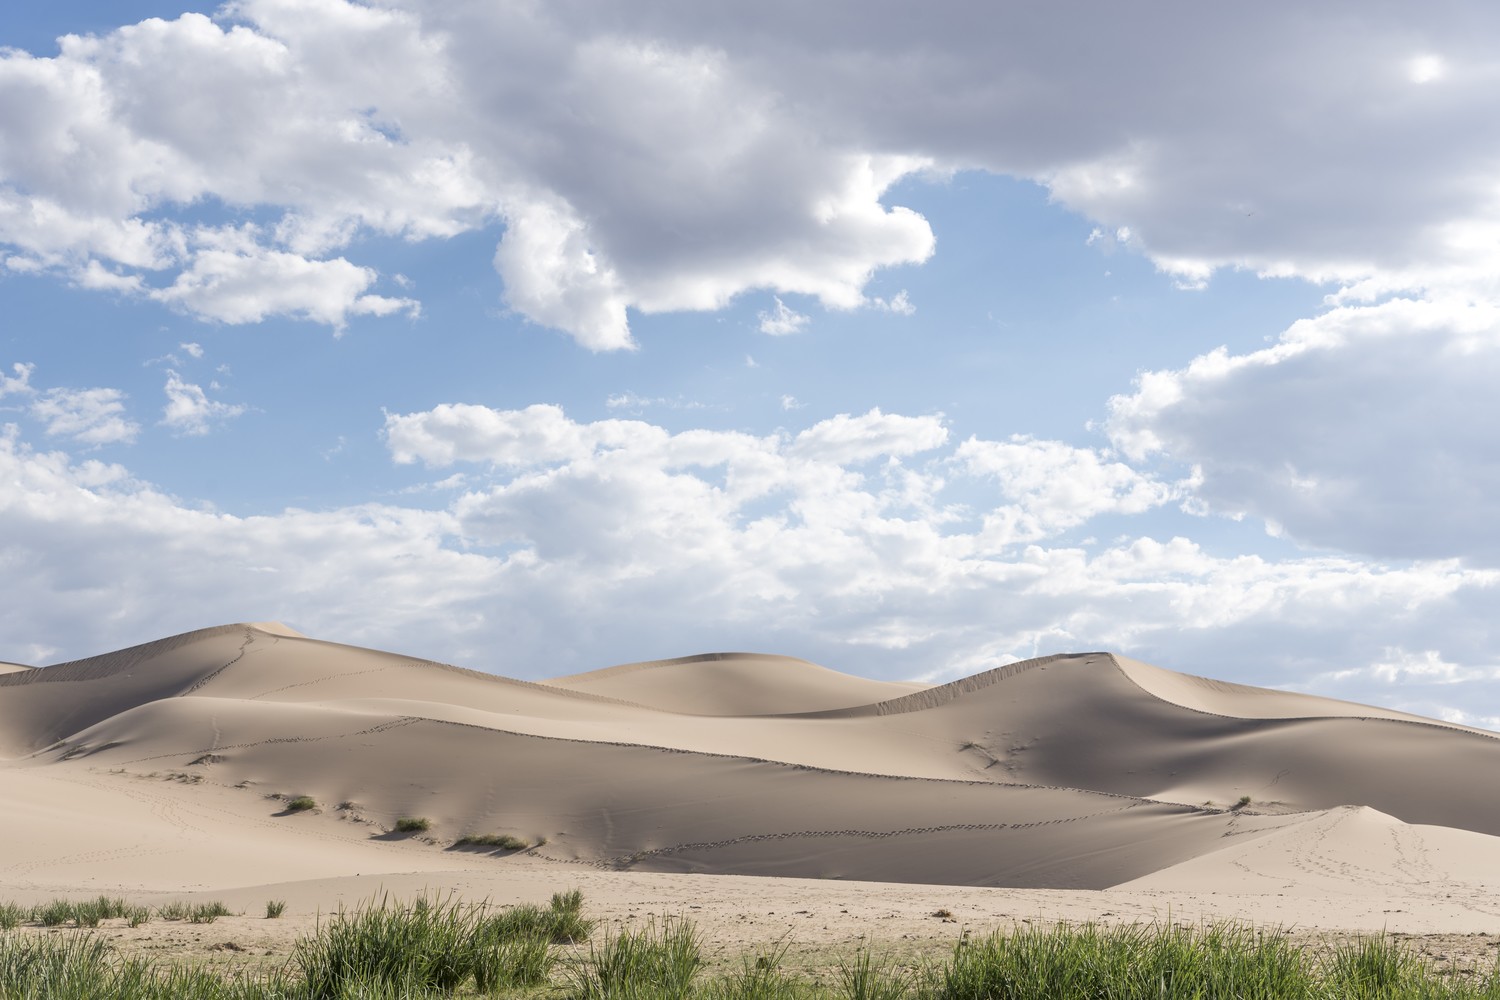 Vast and golden Khongor Sand Dunes in Mongolia, stretching across the horizon under a clear blue sky.